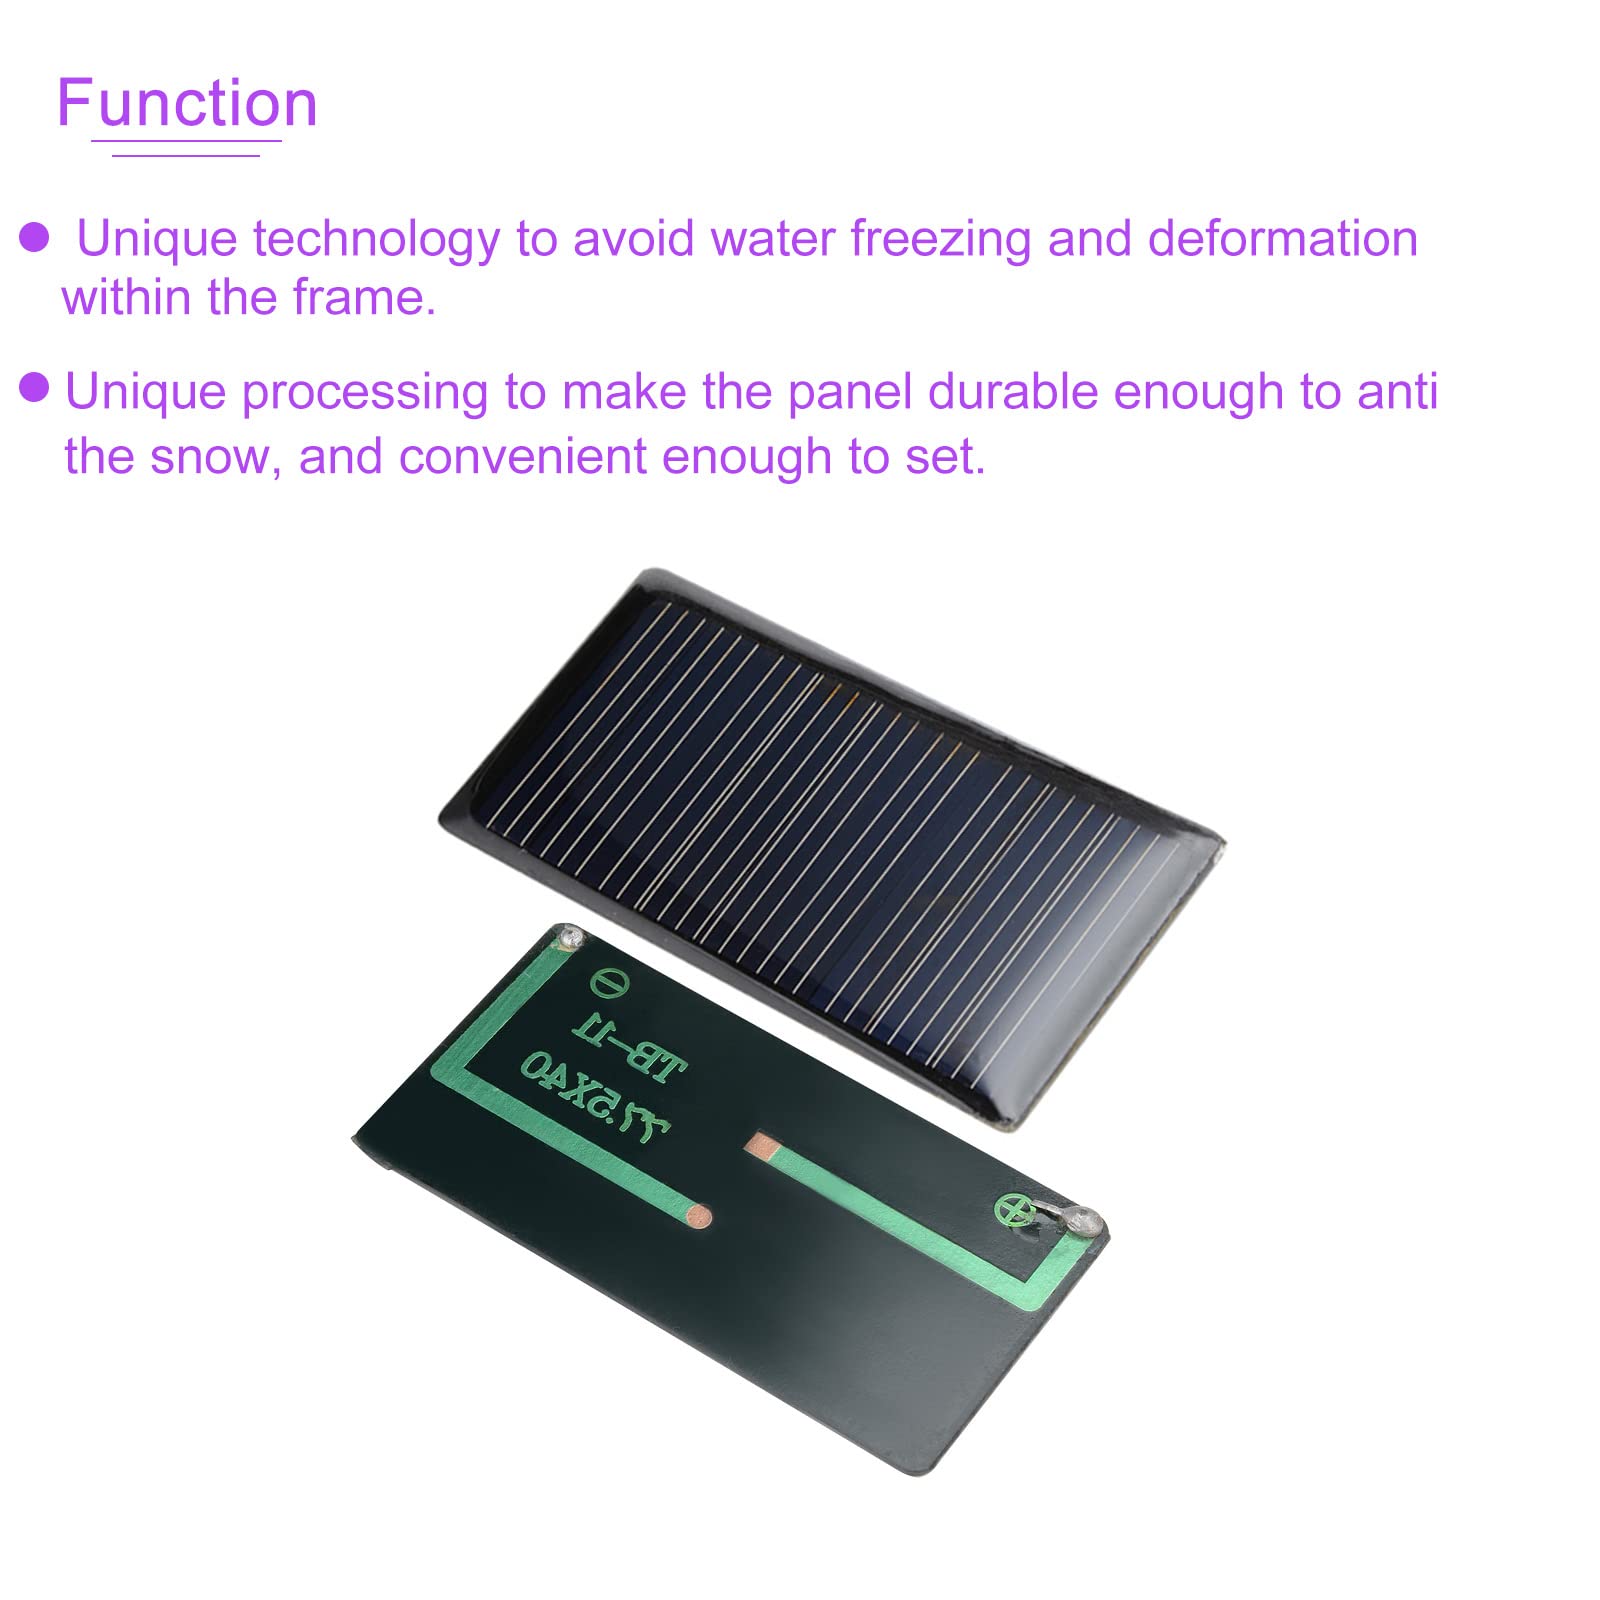 DMiotech 5 Pack 4.5V 60mA 77.5mm x 40mm Mini Solar Panel Cell for DIY Electric Power Project